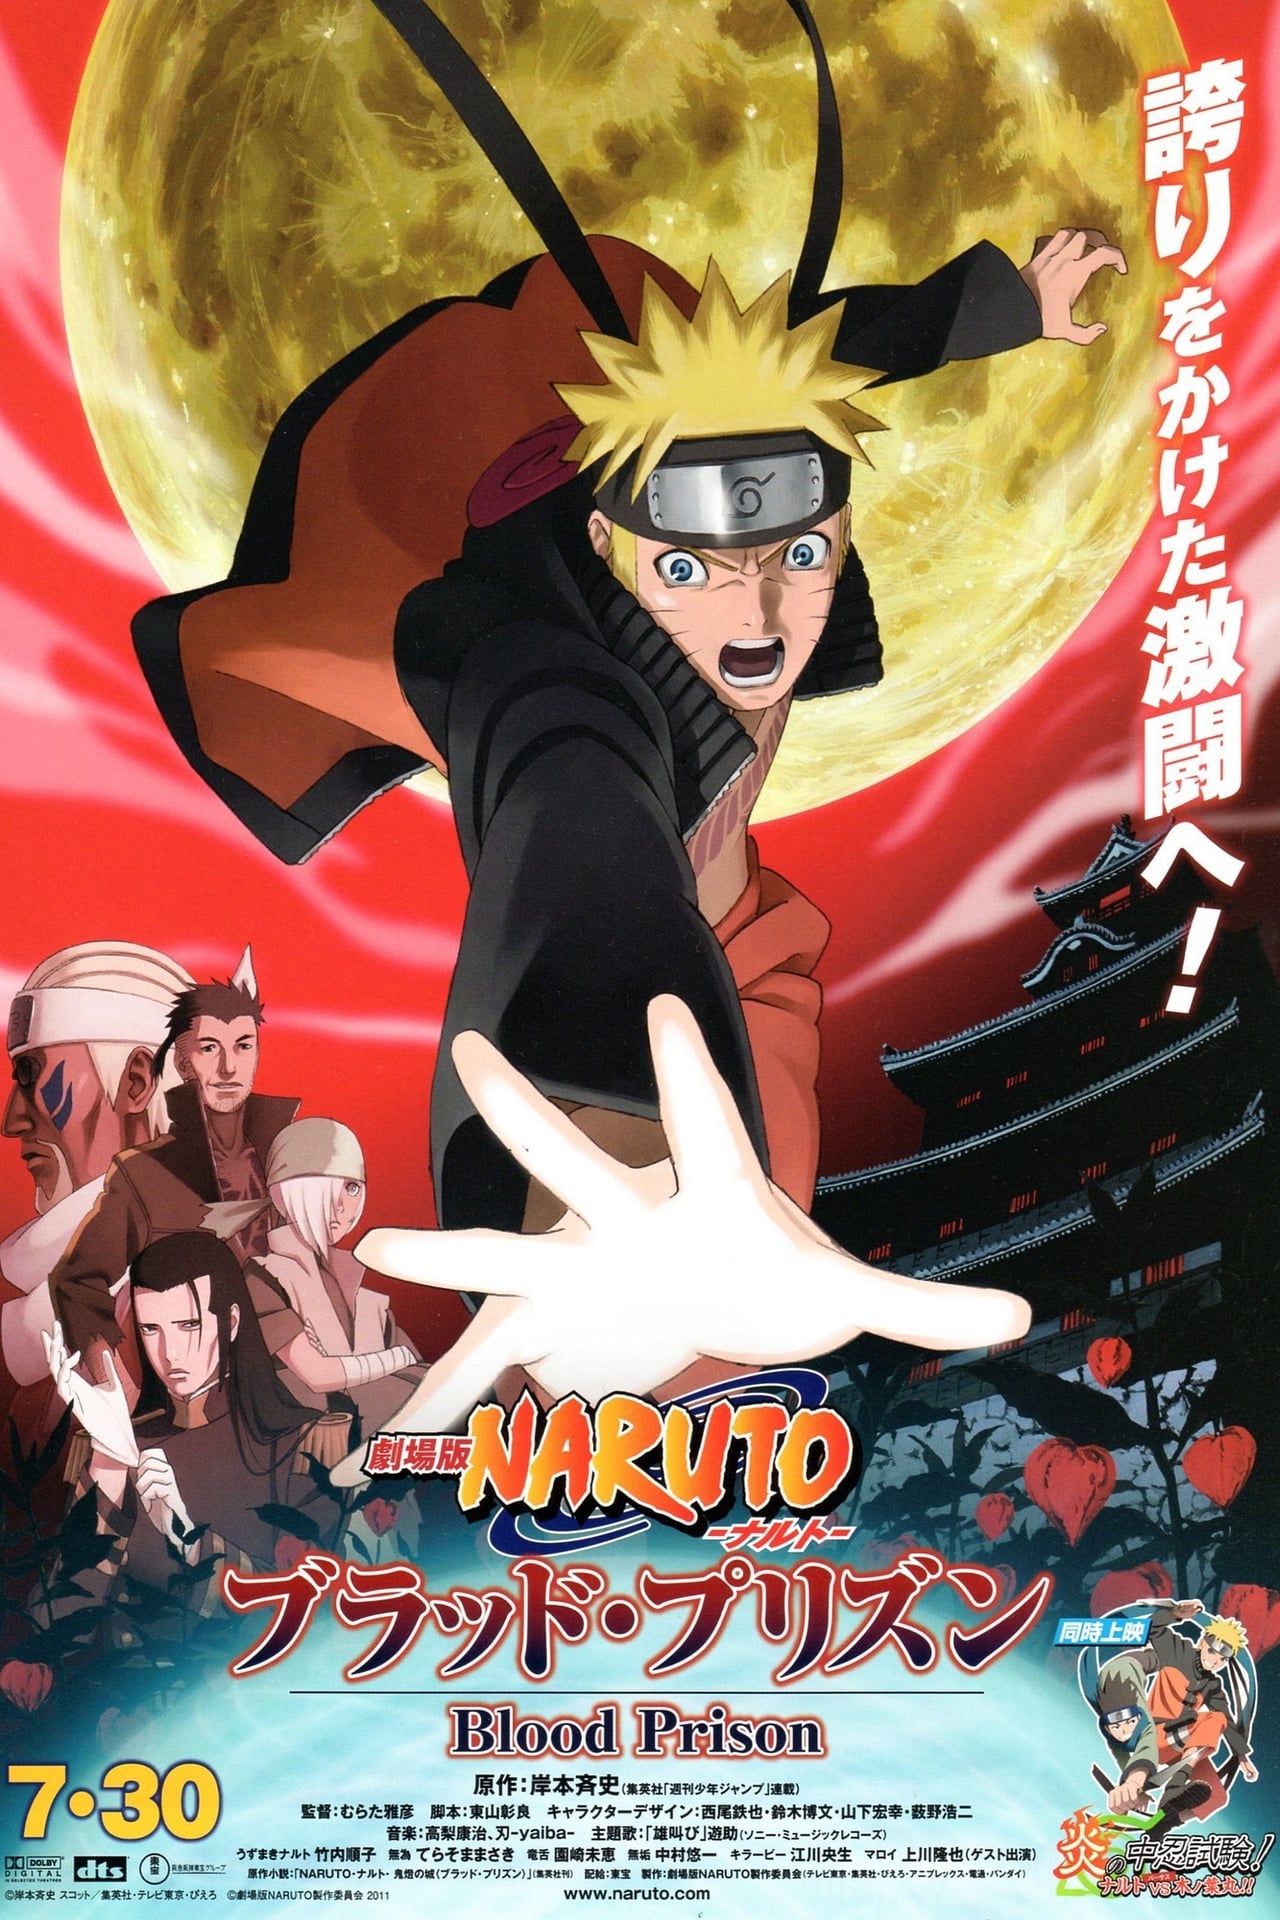 Naruto Shippuden the Movie: Blood Prison wiki, synopsis, reviews, watch